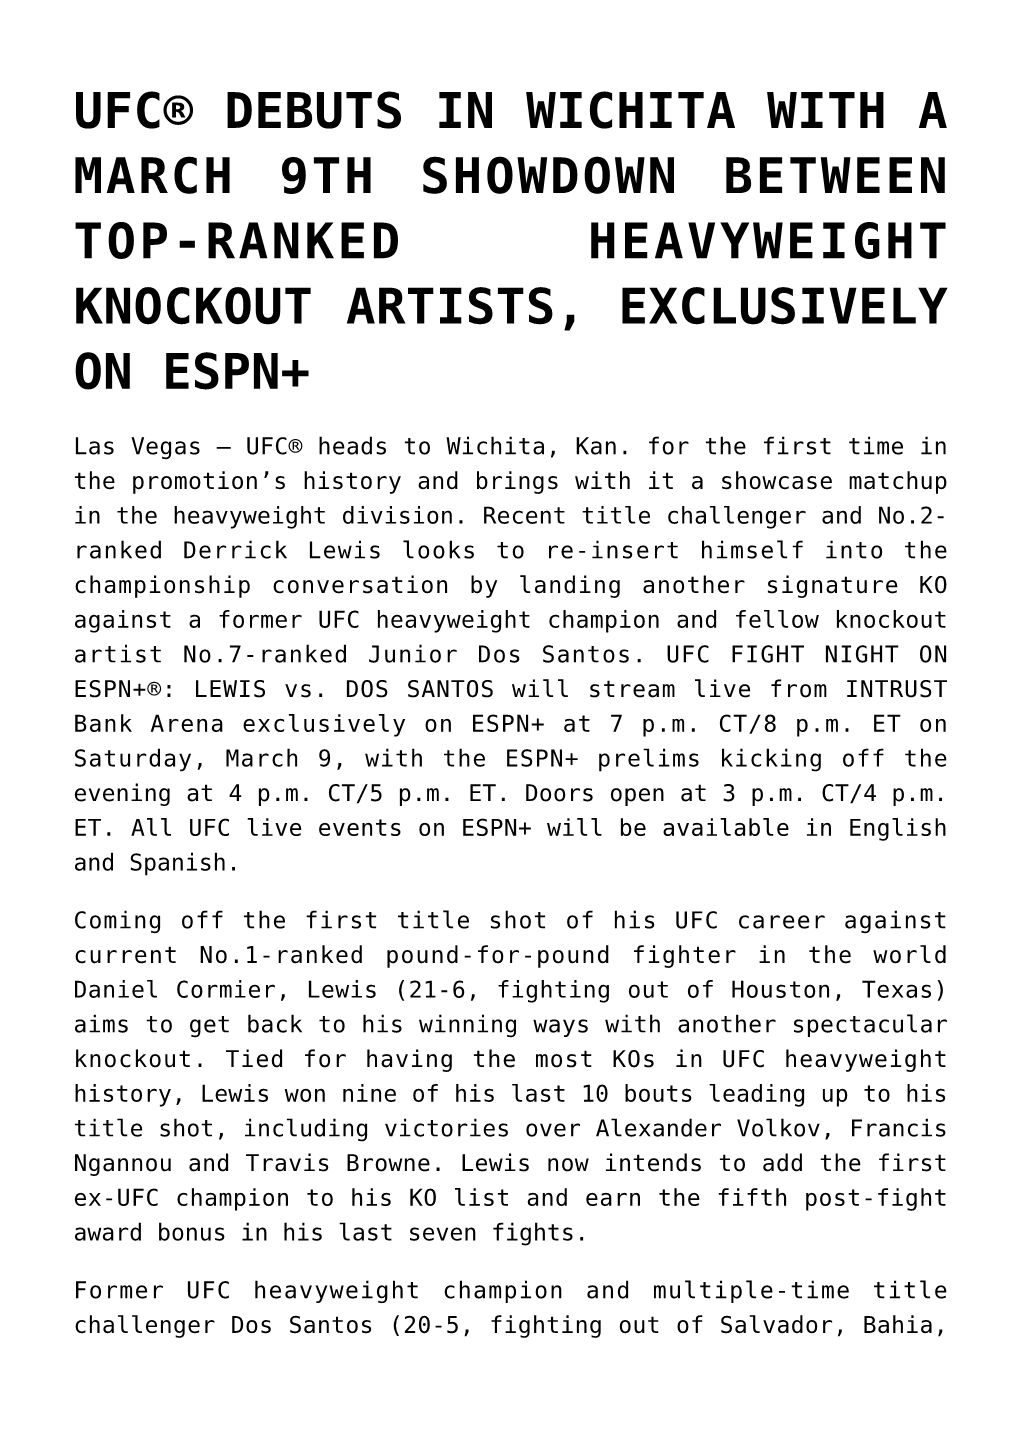 Ufc® Debuts in Wichita with a March 9Th Showdown Between Top-Ranked Heavyweight Knockout Artists, Exclusively on Espn+